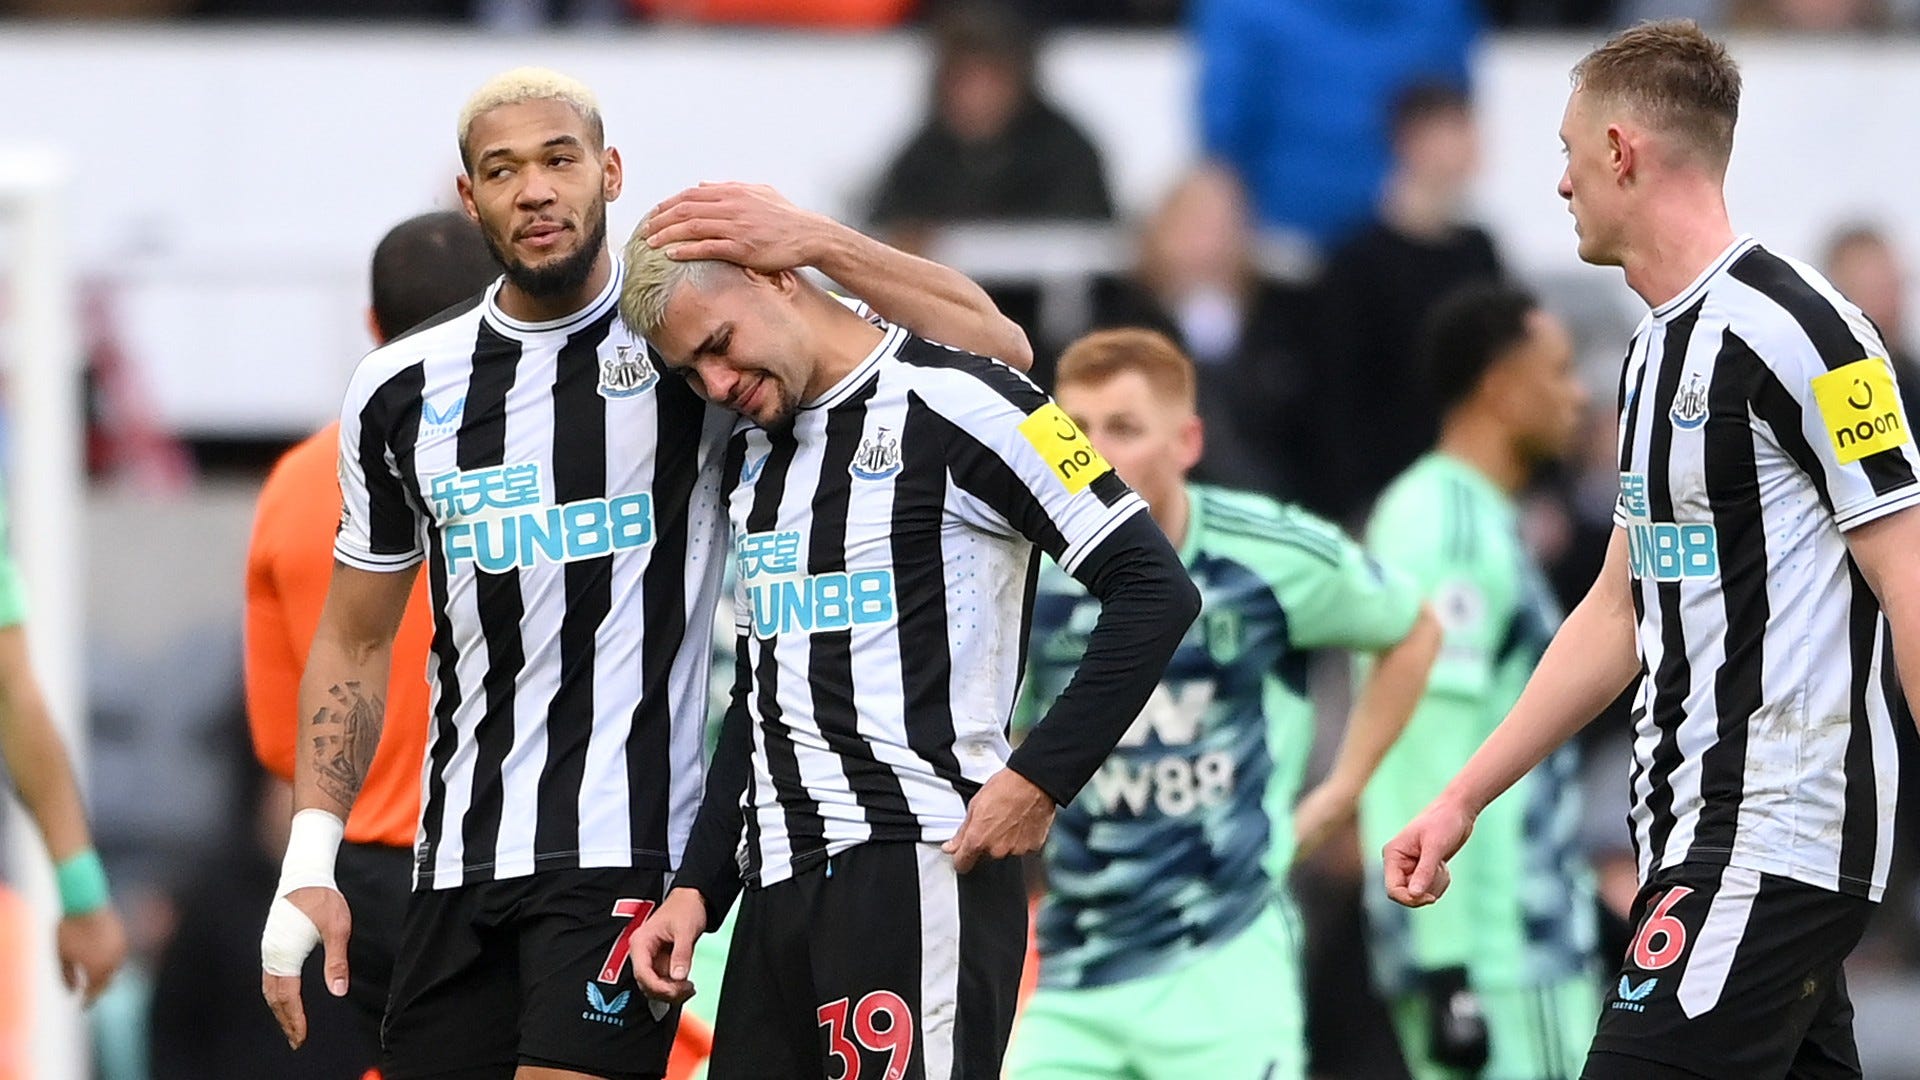  Newcastle United's head coach in tears as his best-holding midfielder sustained ankle Injury